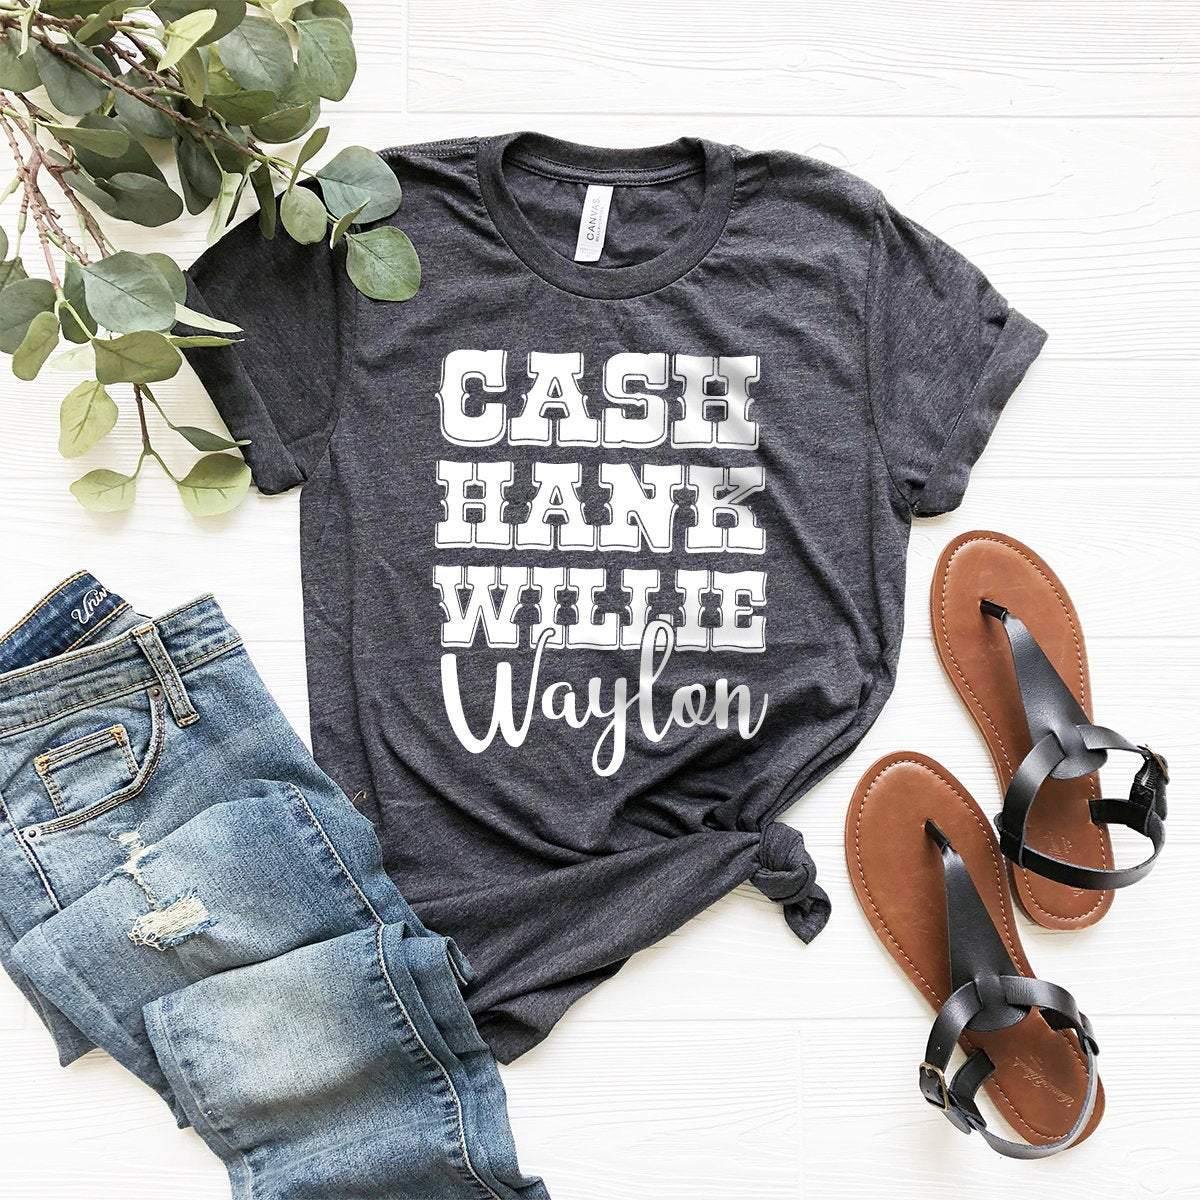 Country Music Shirt, Country Shirt, Southern Life Tee, The Highwayman Fan Shirt, Country Concert Shirt, Southern T-Shirt, Western Life Shirt - Fastdeliverytees.com